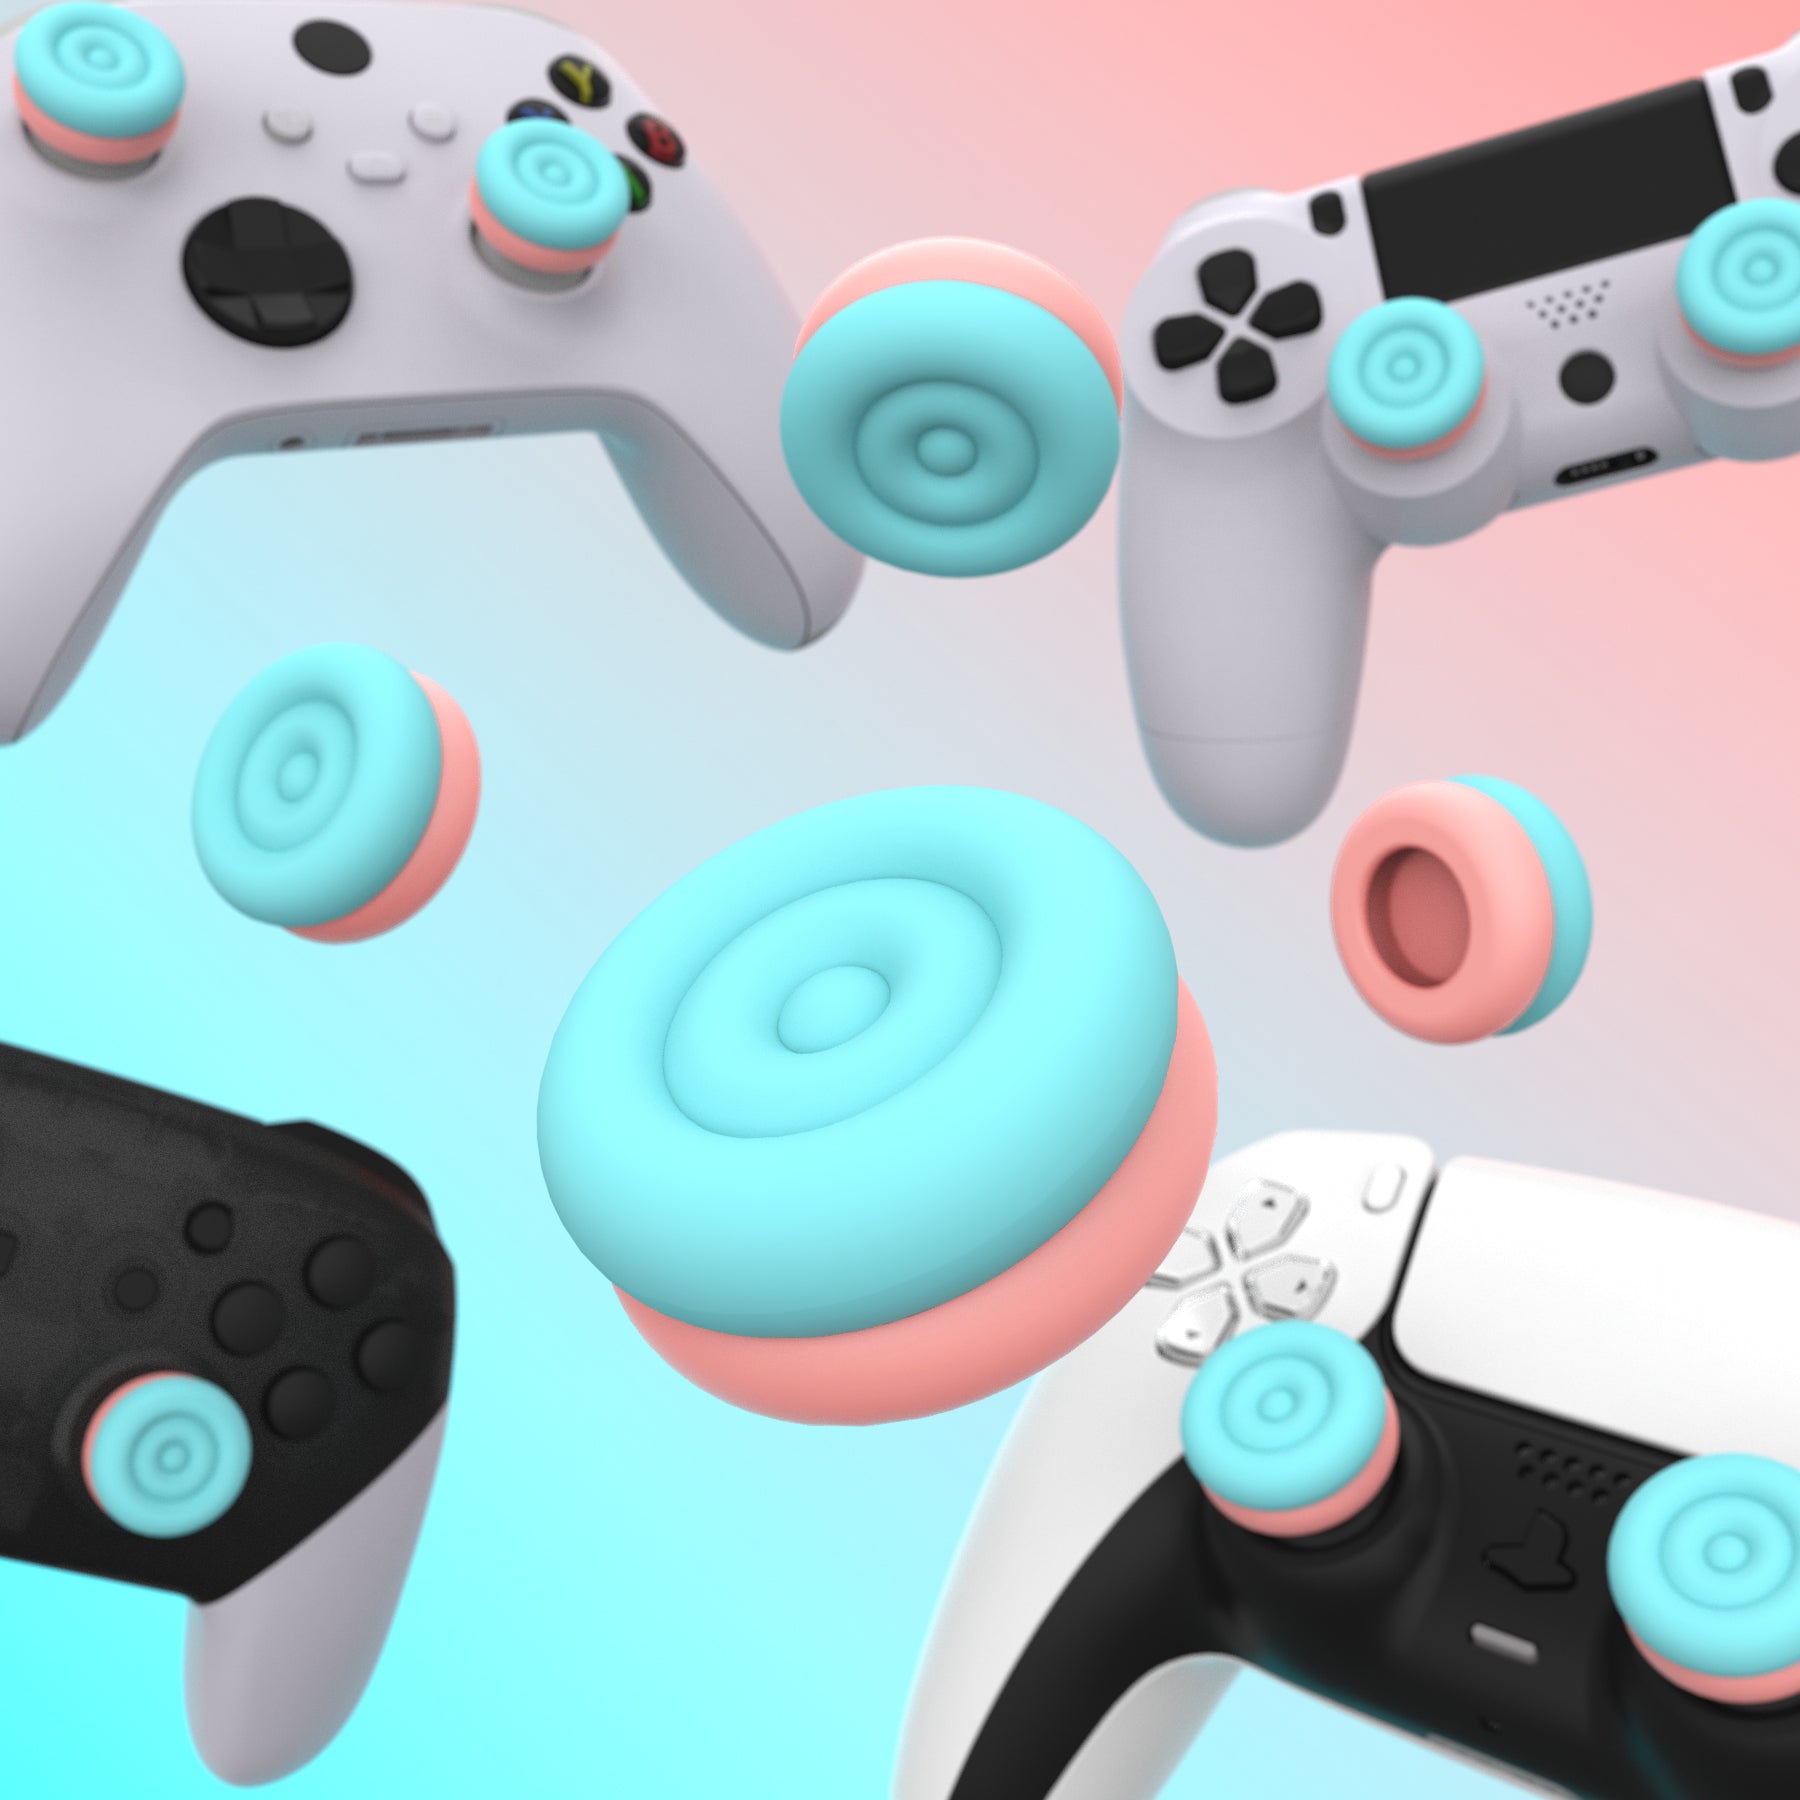 PlayVital Thumbs Cushion Caps Thumb Grips for ps5, for ps4, Thumbstick Grip Cover for Xbox Series X/S, Thumb Grip Caps for Xbox One, Elite Series 2, for Switch Pro Controller - Aqua Blue & Coral Pink - PJM3041 PlayVital